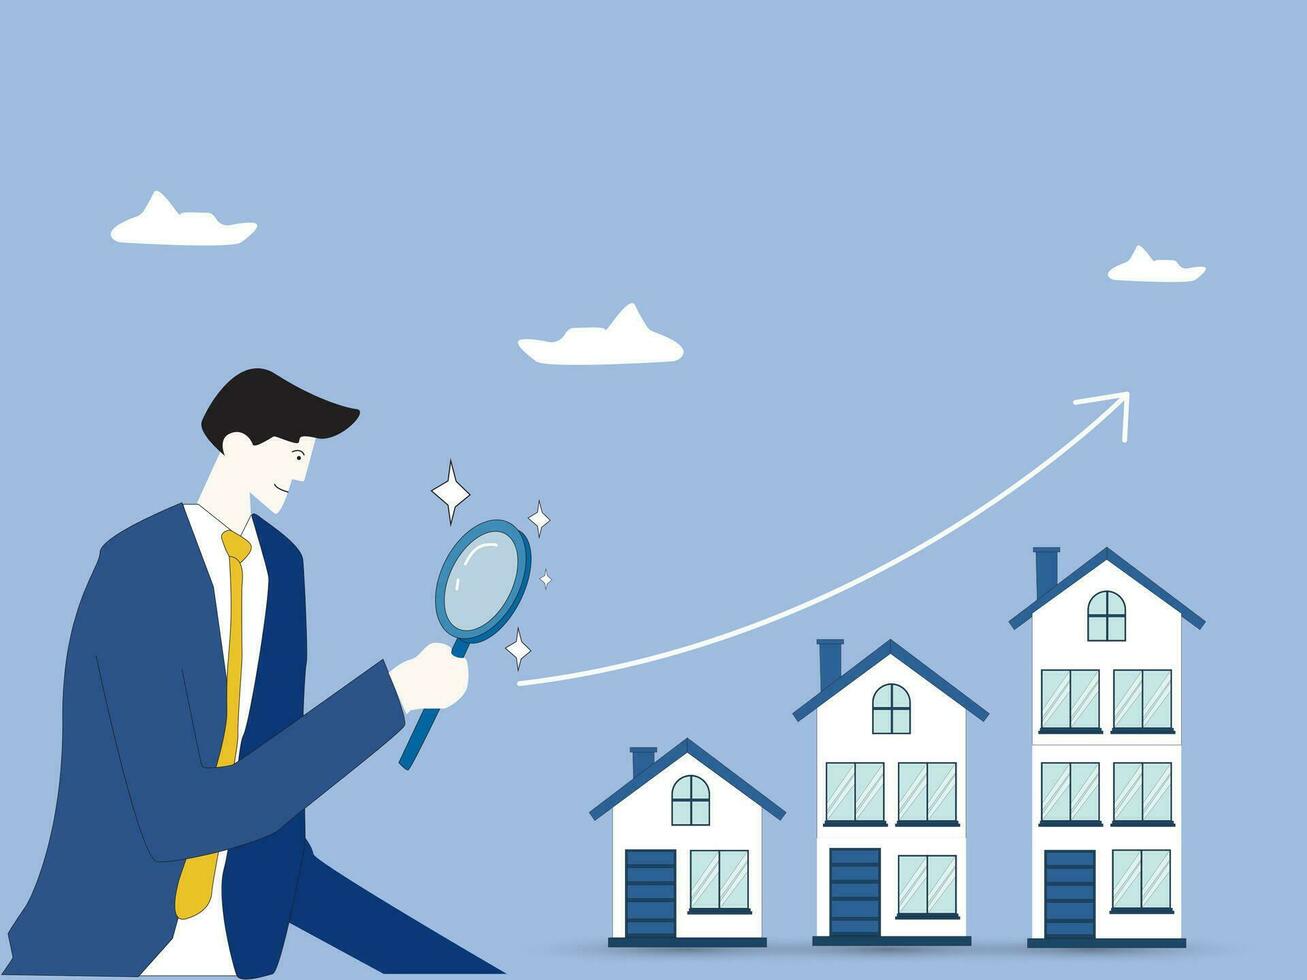 businessman investor with telescope for Real estate and housing investment opportunity, property growth forecast or vision, price rising up concept. vector illustration.